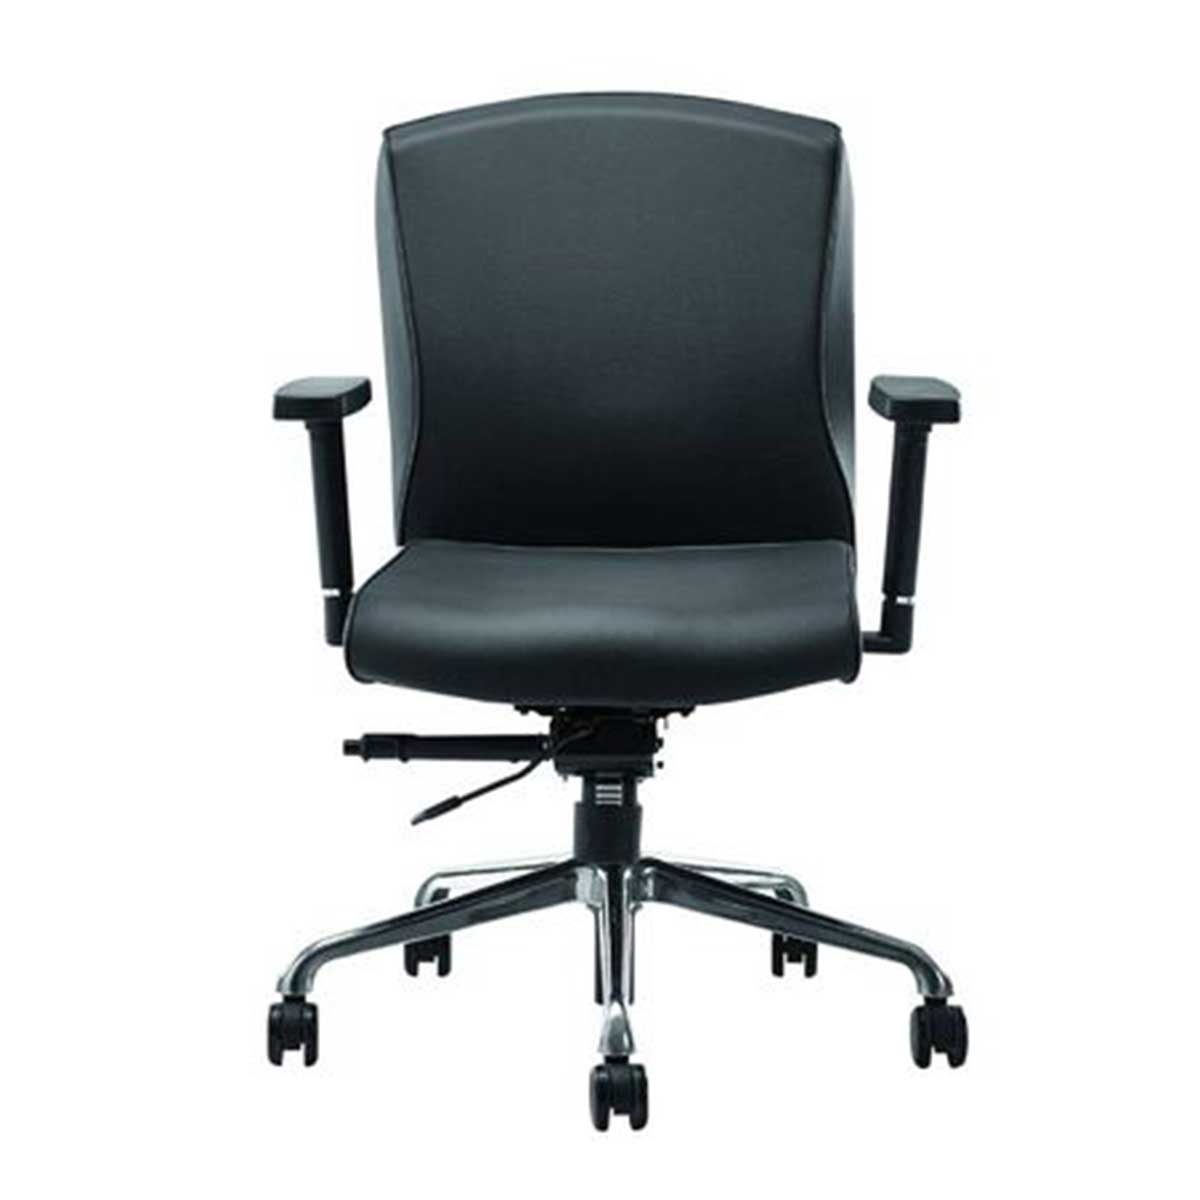 Low Back Office Chair Manufacturers, Suppliers in Yusuf Sarai